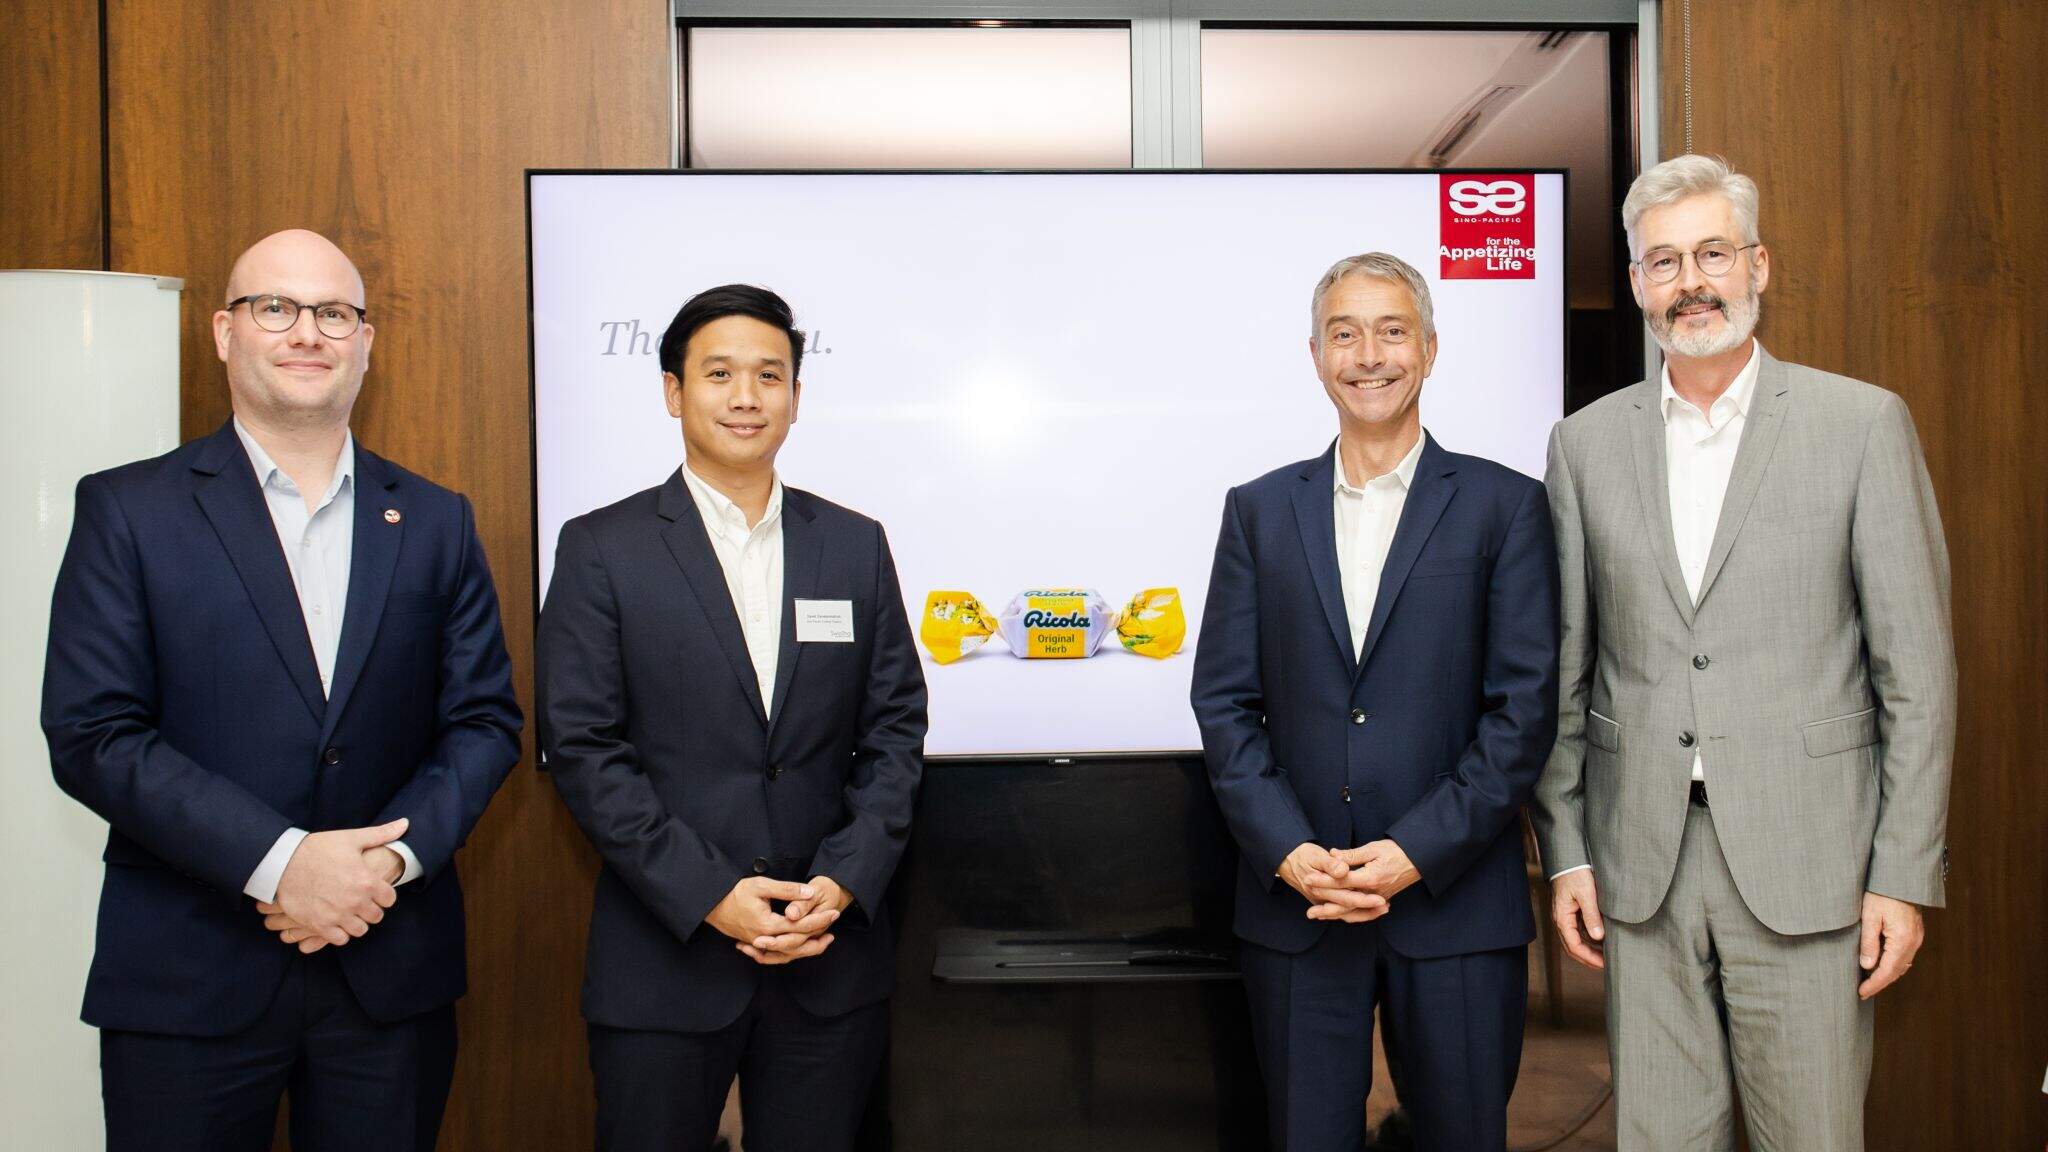 From left to right David Stauffacher, Executive Director Swiss-Thai Chamber of Commerce; Savet Savetsomphob, Senior Executive Director Sino Pacific Trading; Samuel Haller, Country Manager Dachser Air & Sea Logistics Switzerland and Pedro Zwahlen, Swiss Ambassador for the Kingdom of Thailand